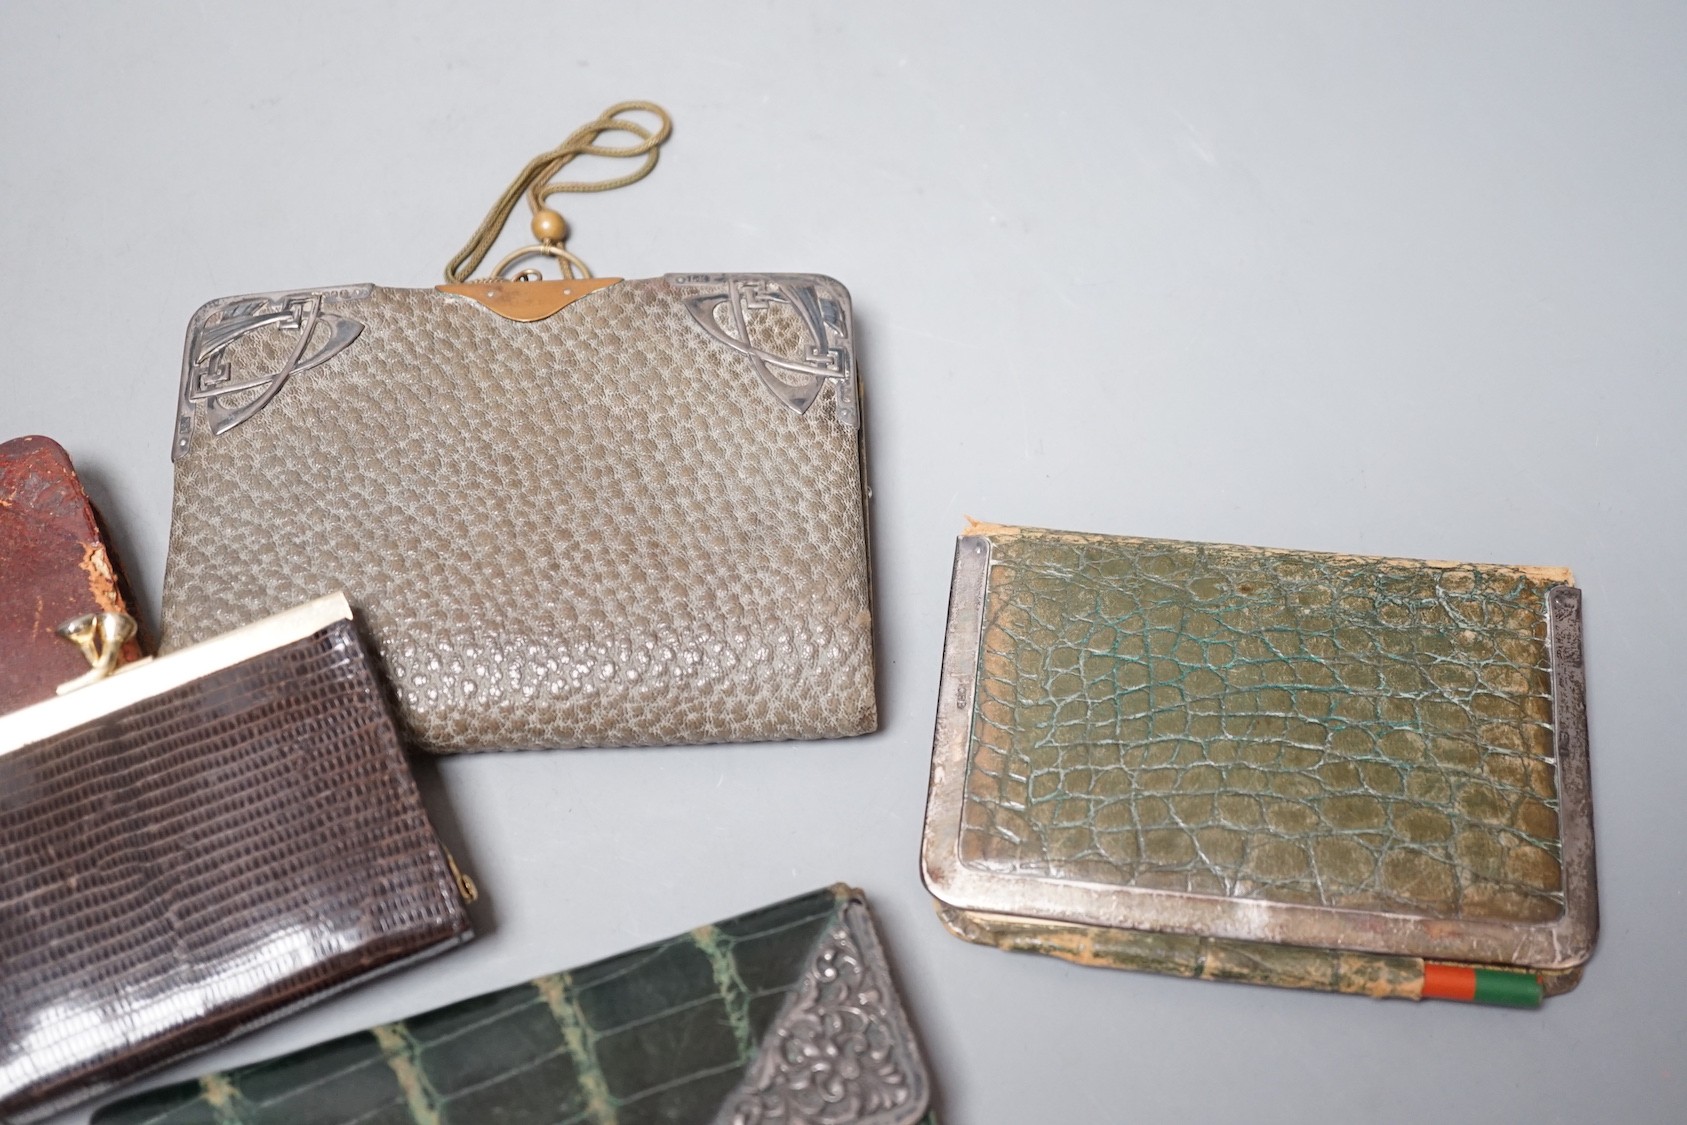 Five assorted early 20th century silver mounted leather purses including Art Nouveau, a similar notebook and one other purse.